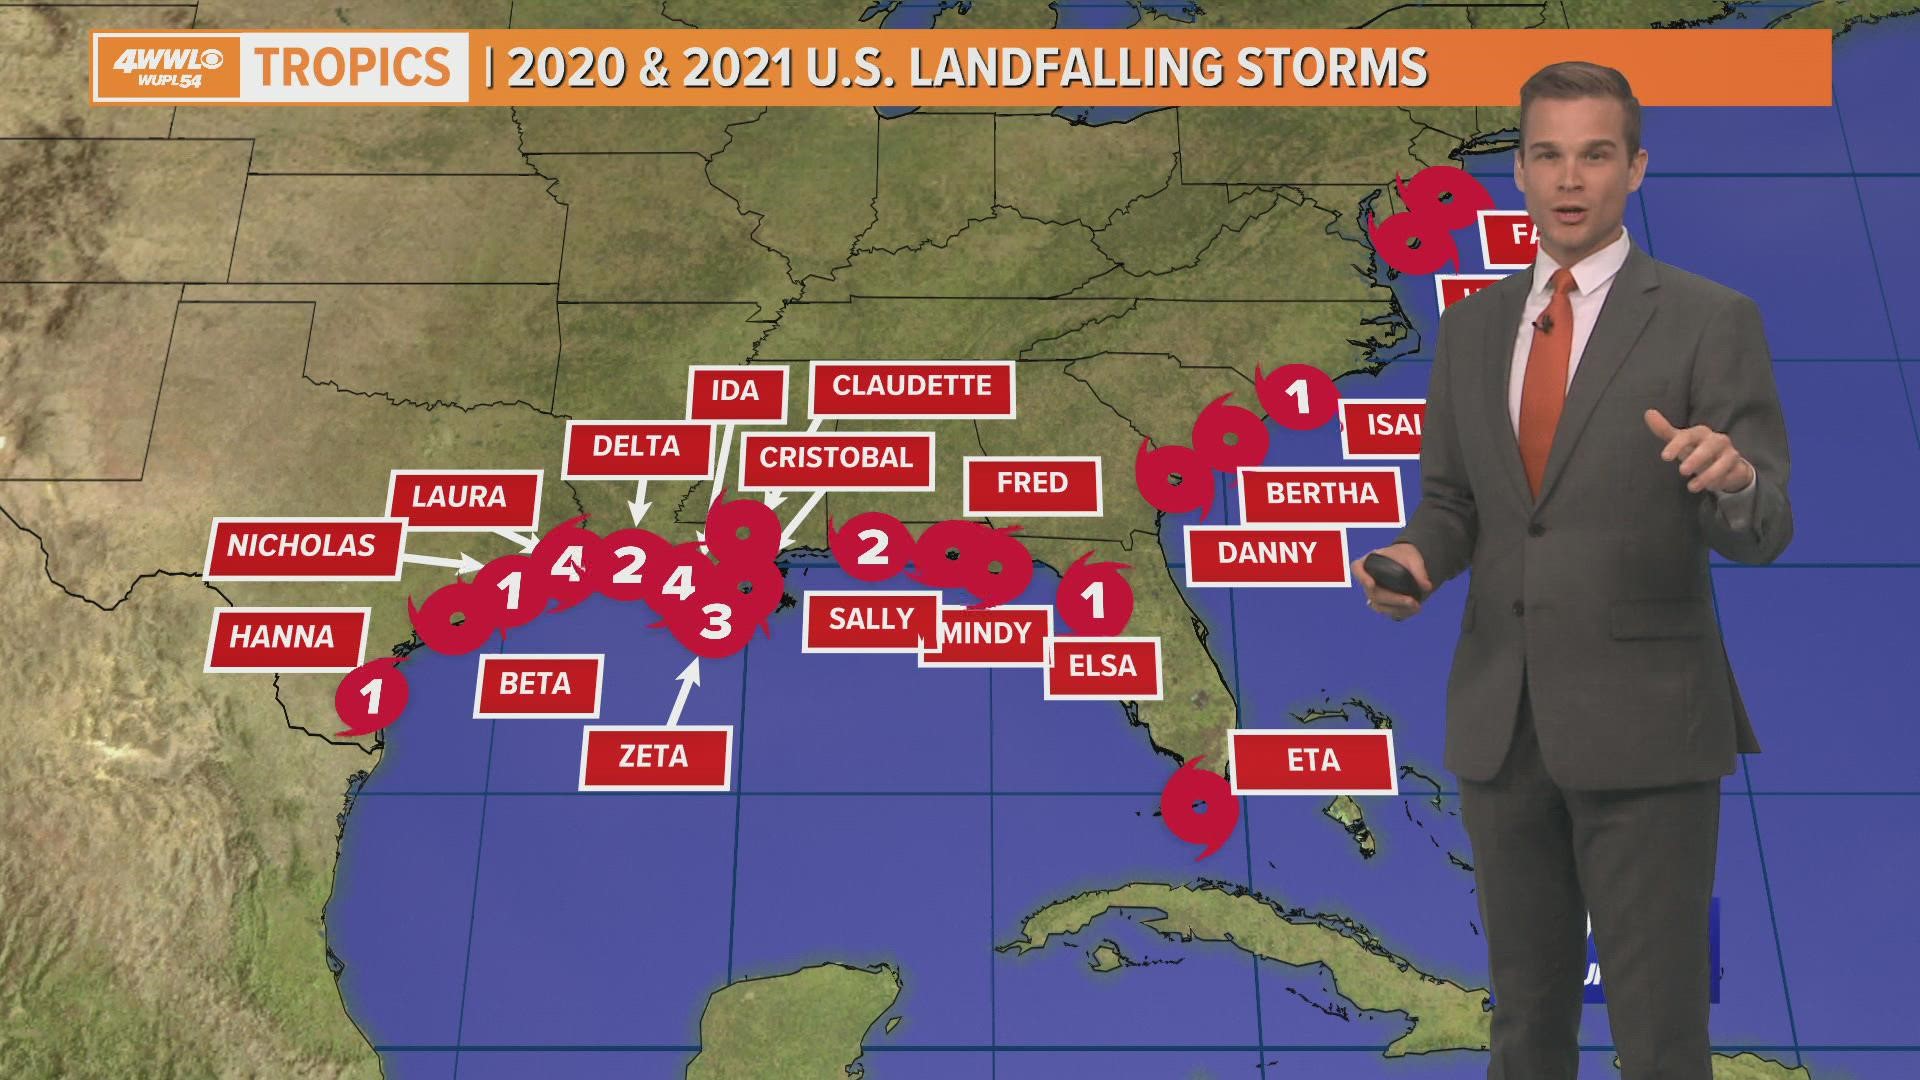 With Nicholas making landfall we have seen 8 storms landfall in the US for the 2021 hurricane season. AND 19 storms have made landfall in the U.S. since 2020.